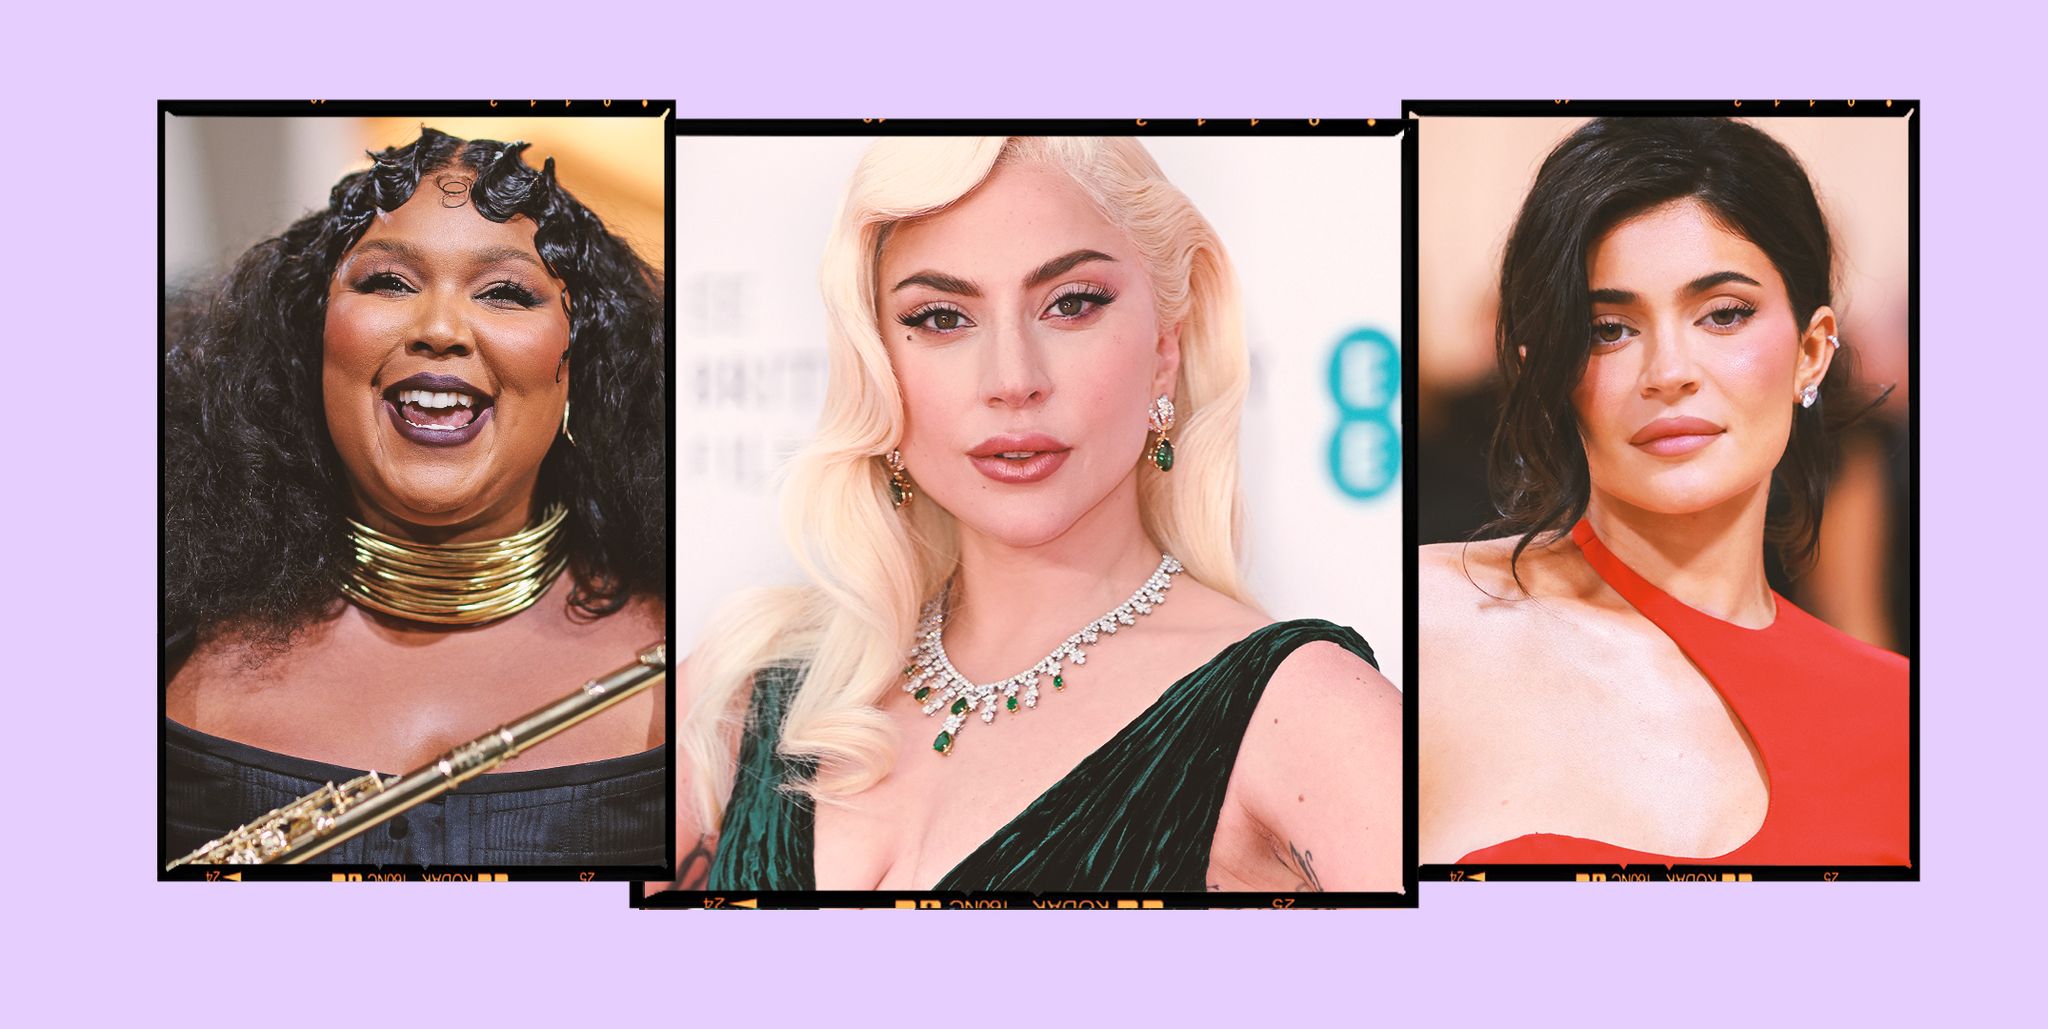 celebs who've shared unedited stretch mark photos including lizzo, lady gaga and kylie jenner